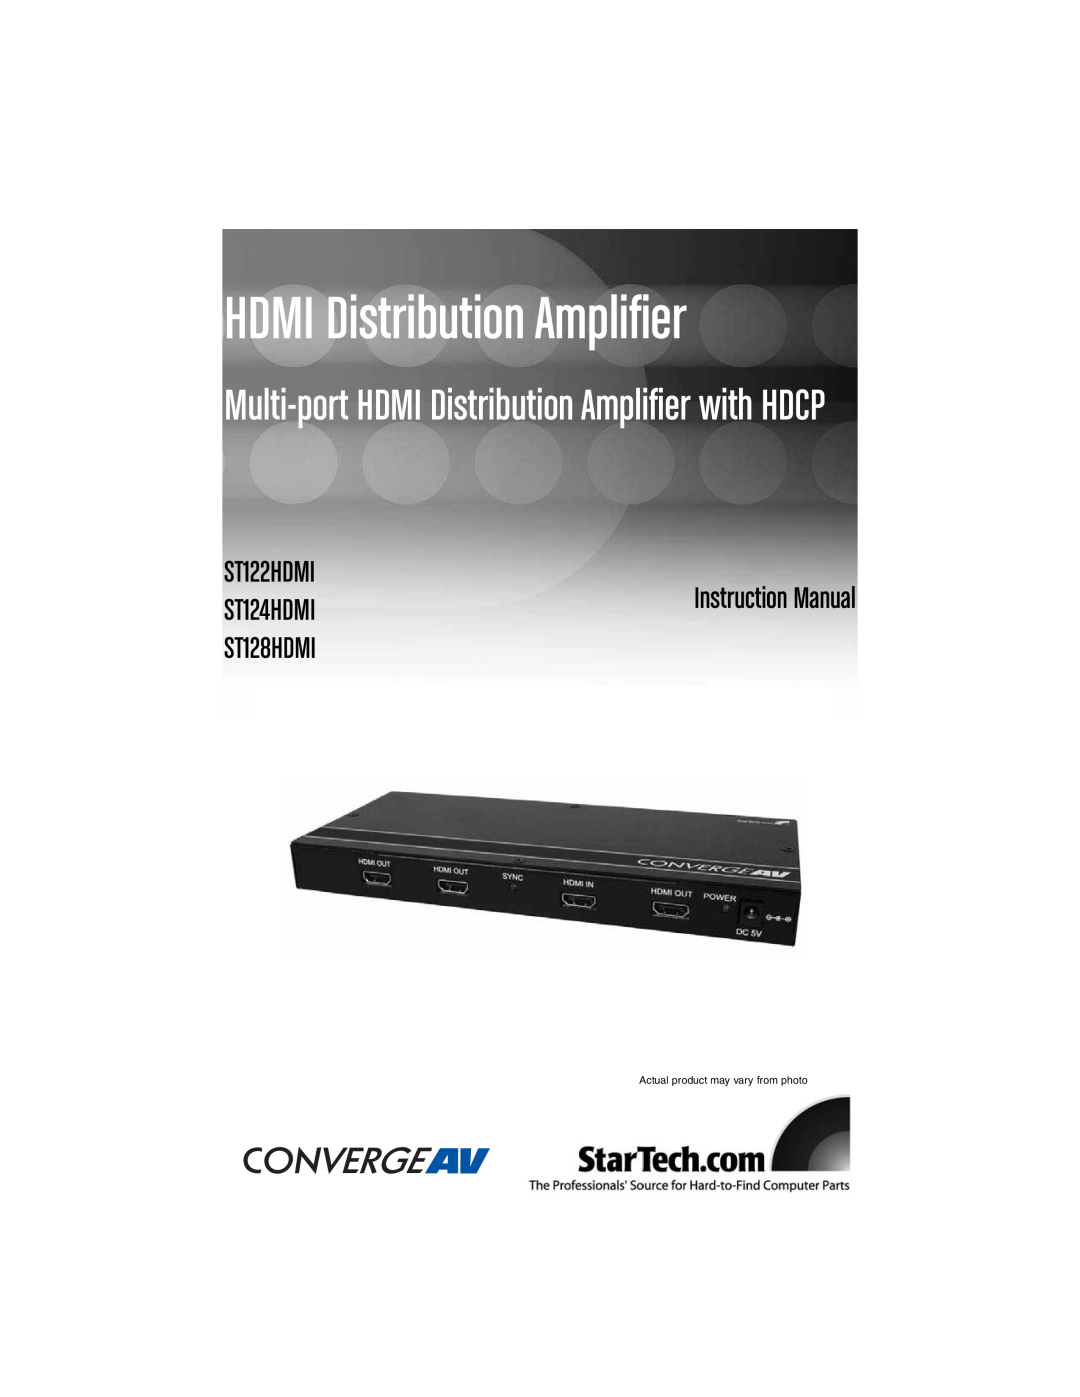 StarTech.com ST122HDMI instruction manual Multi-portHDMI Distribution Amplifier with HDCP, ST124HDMI, ST128HDMI 